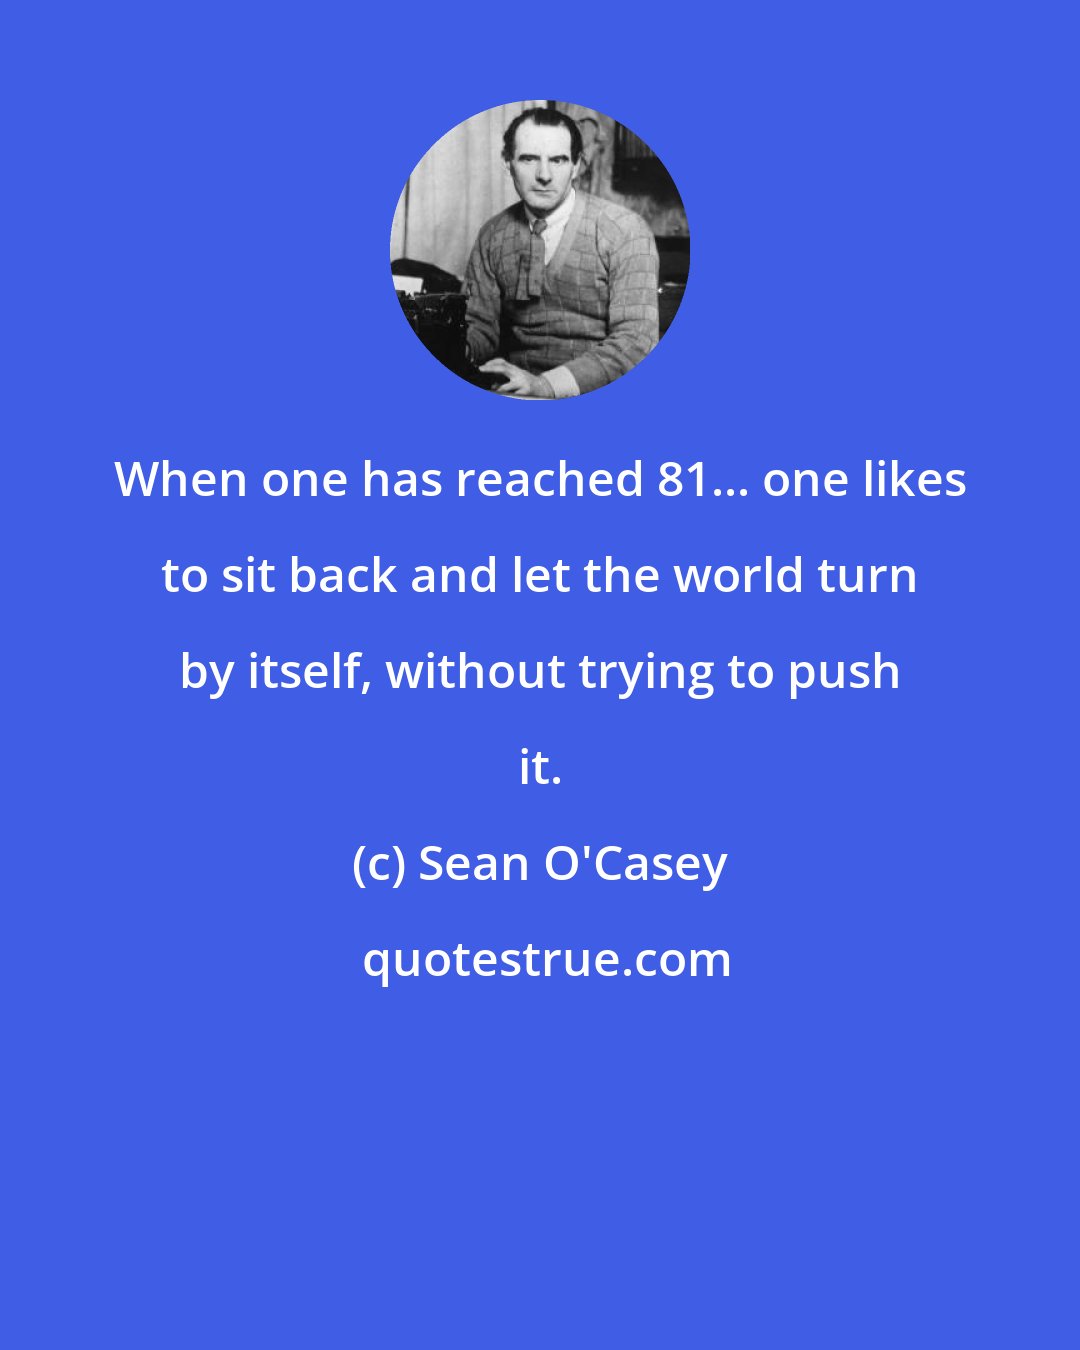 Sean O'Casey: When one has reached 81... one likes to sit back and let the world turn by itself, without trying to push it.